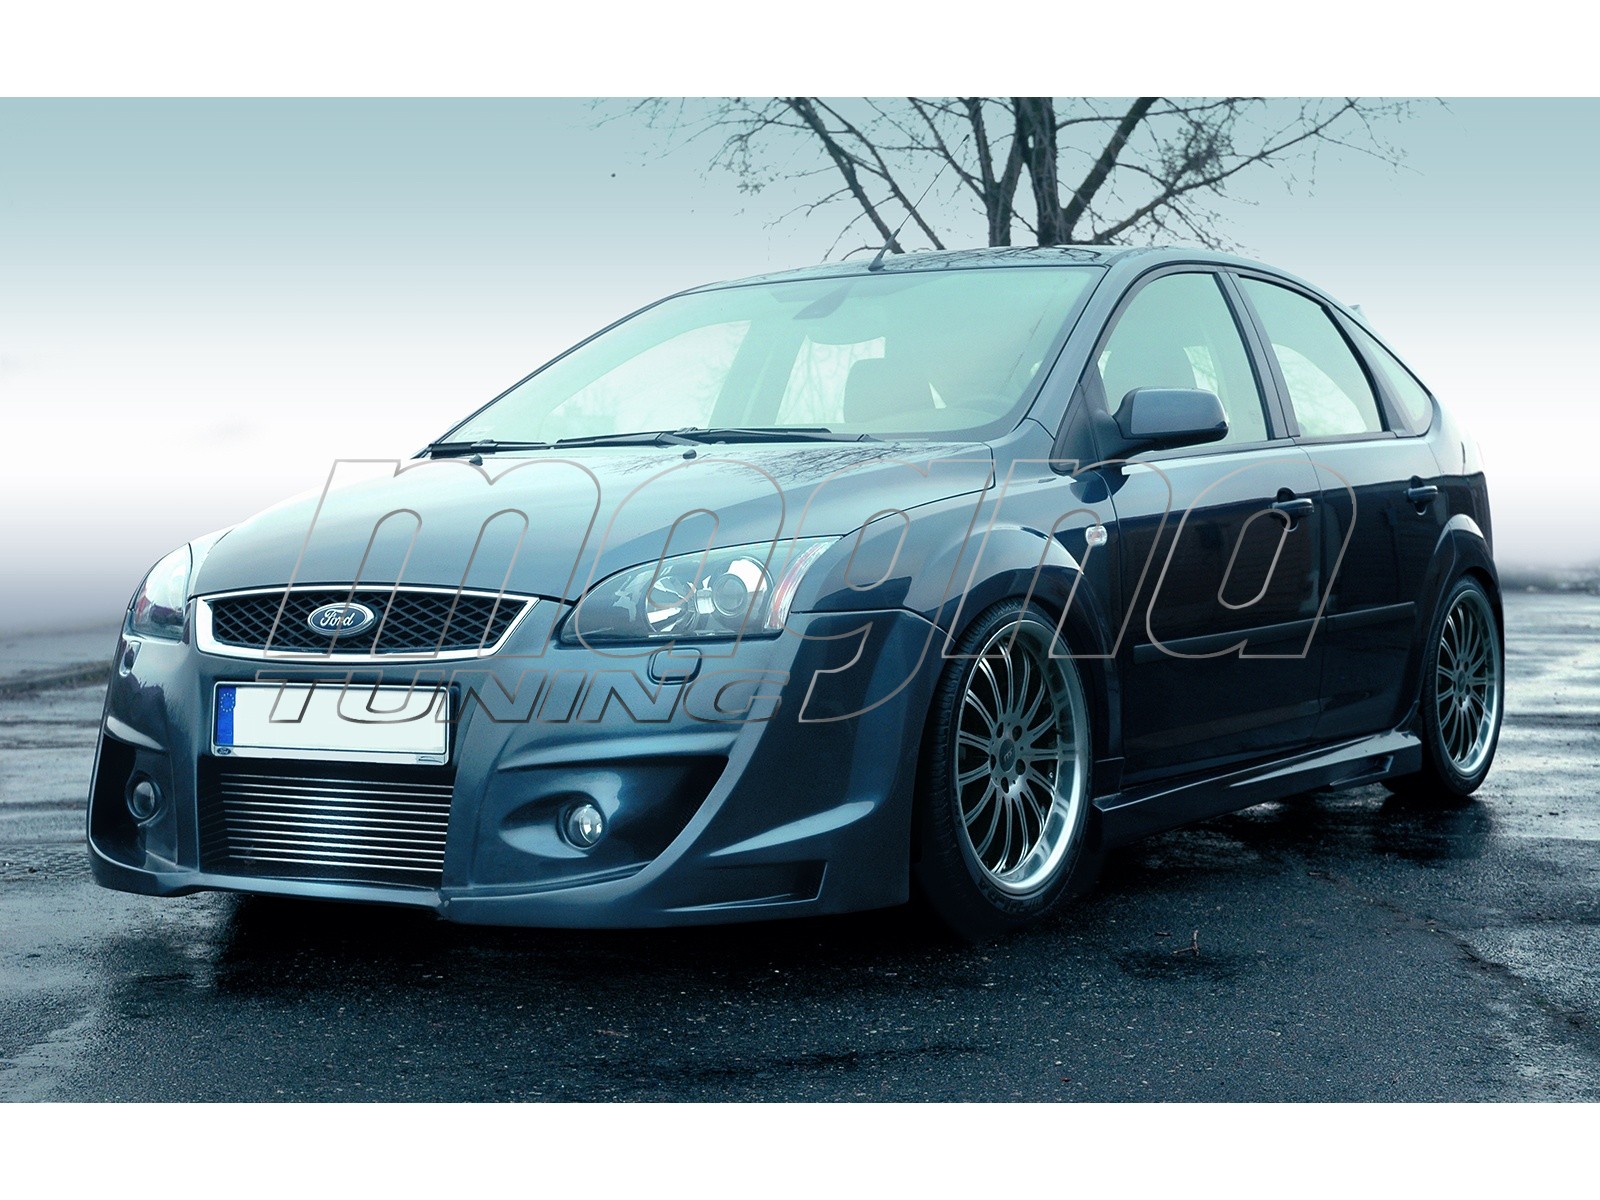 Ford Focus 2 Trophy Body Kit